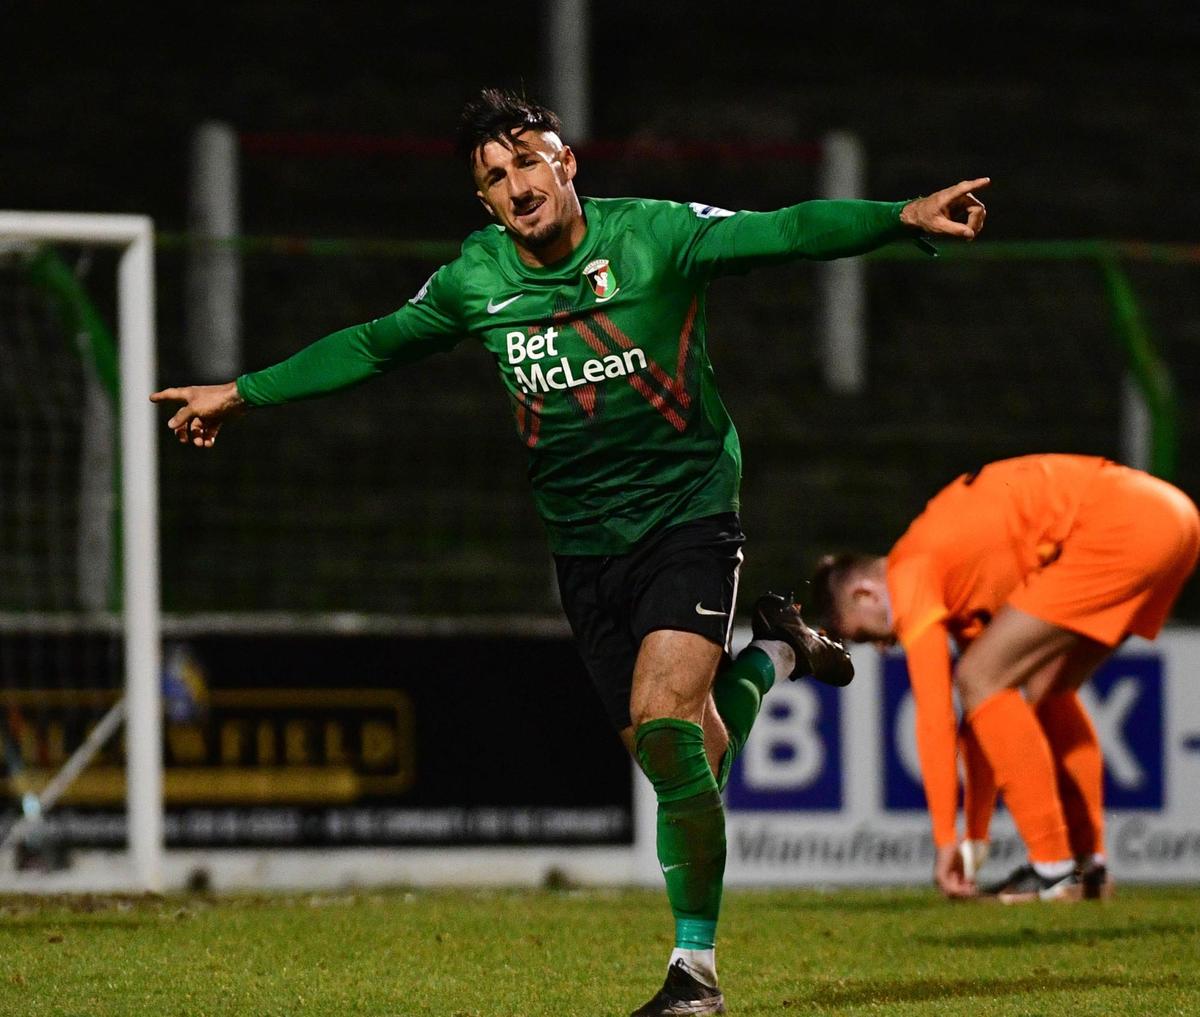 Danny Purkis steps up with last-gasp goal as Glentoran edge past Ballymena